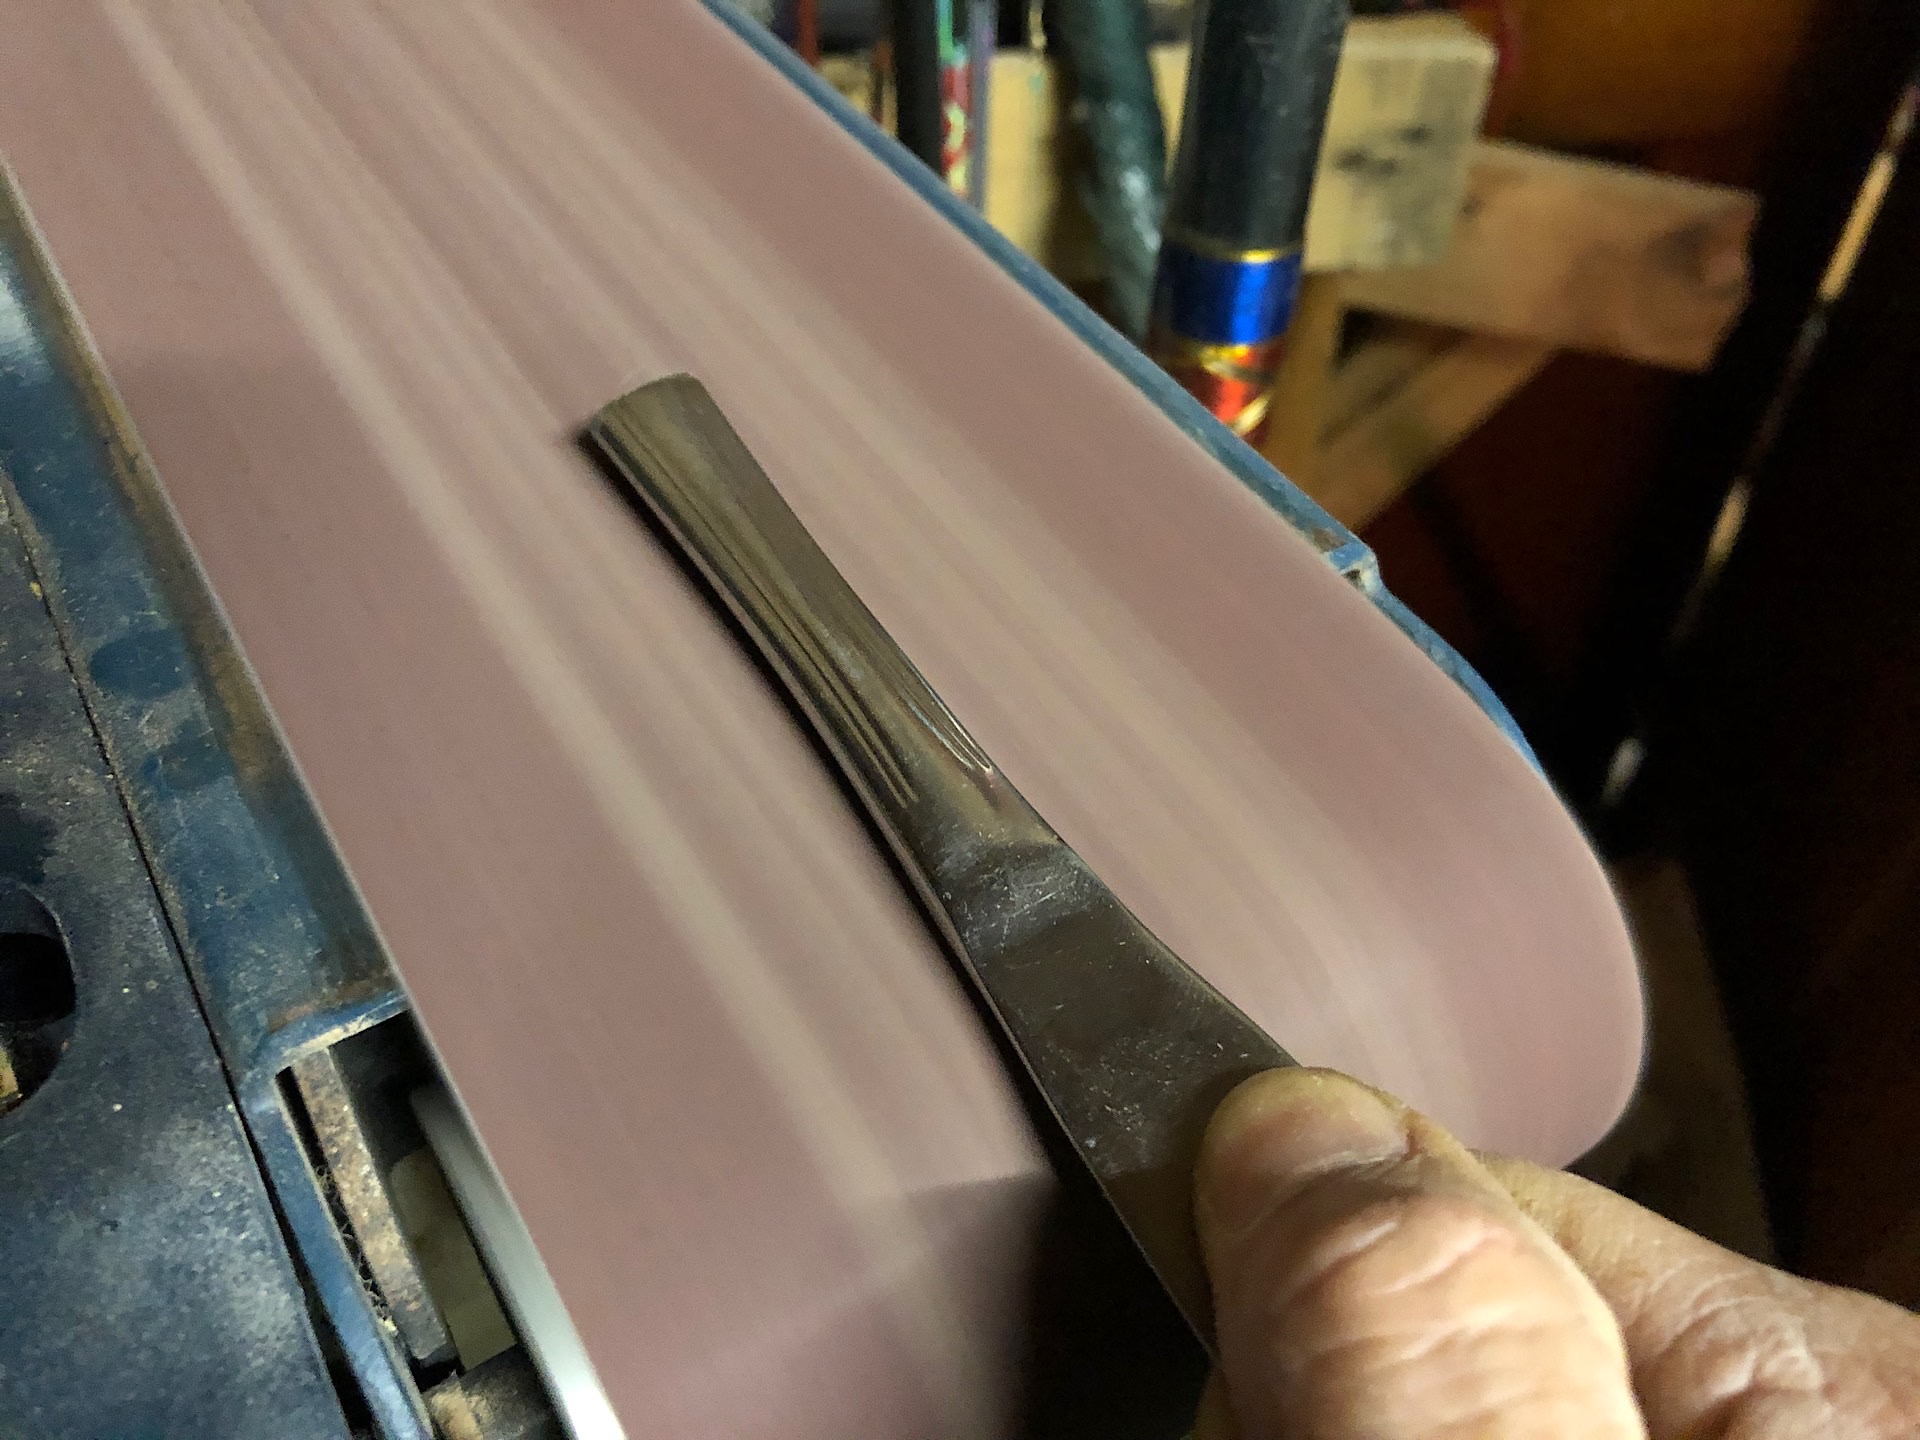 Sanding the handle of the knife